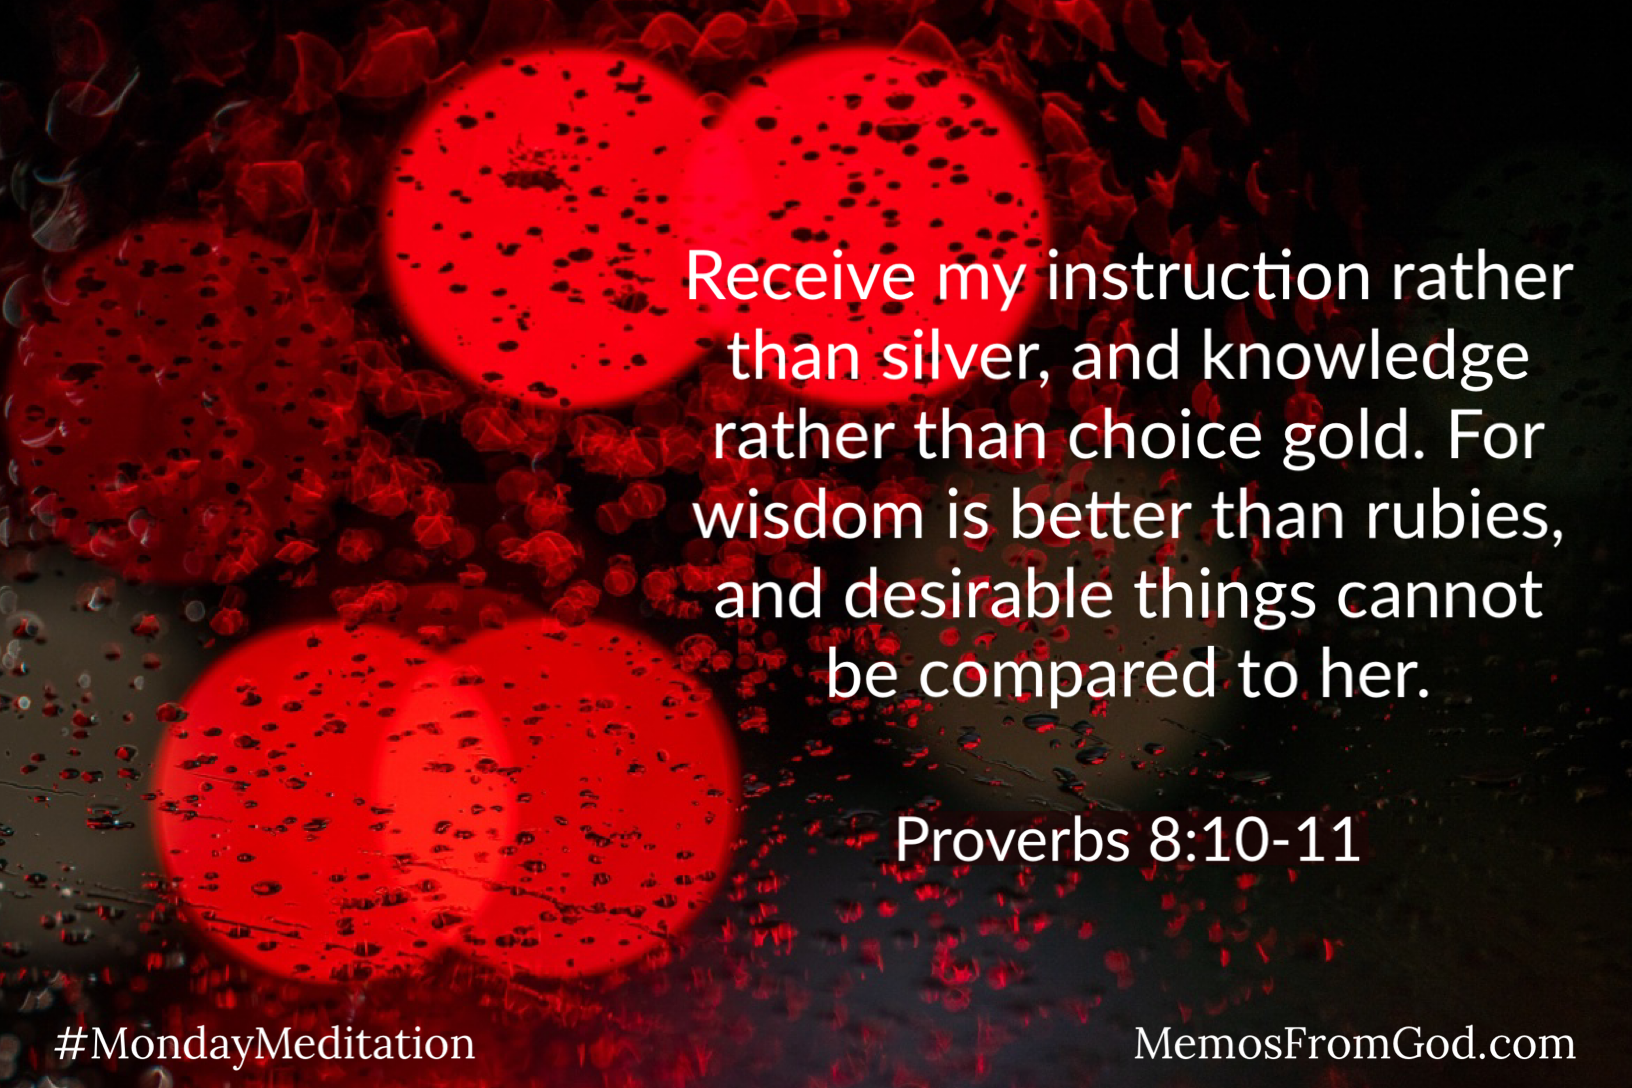 A bokeh background of round, red lights. Caption: Receive my instruction rather than silver, and knowledge rather than choice gold. For wisdom is better than rubies, and desirable things cannot be compared to her. Proverbs 8:10-11